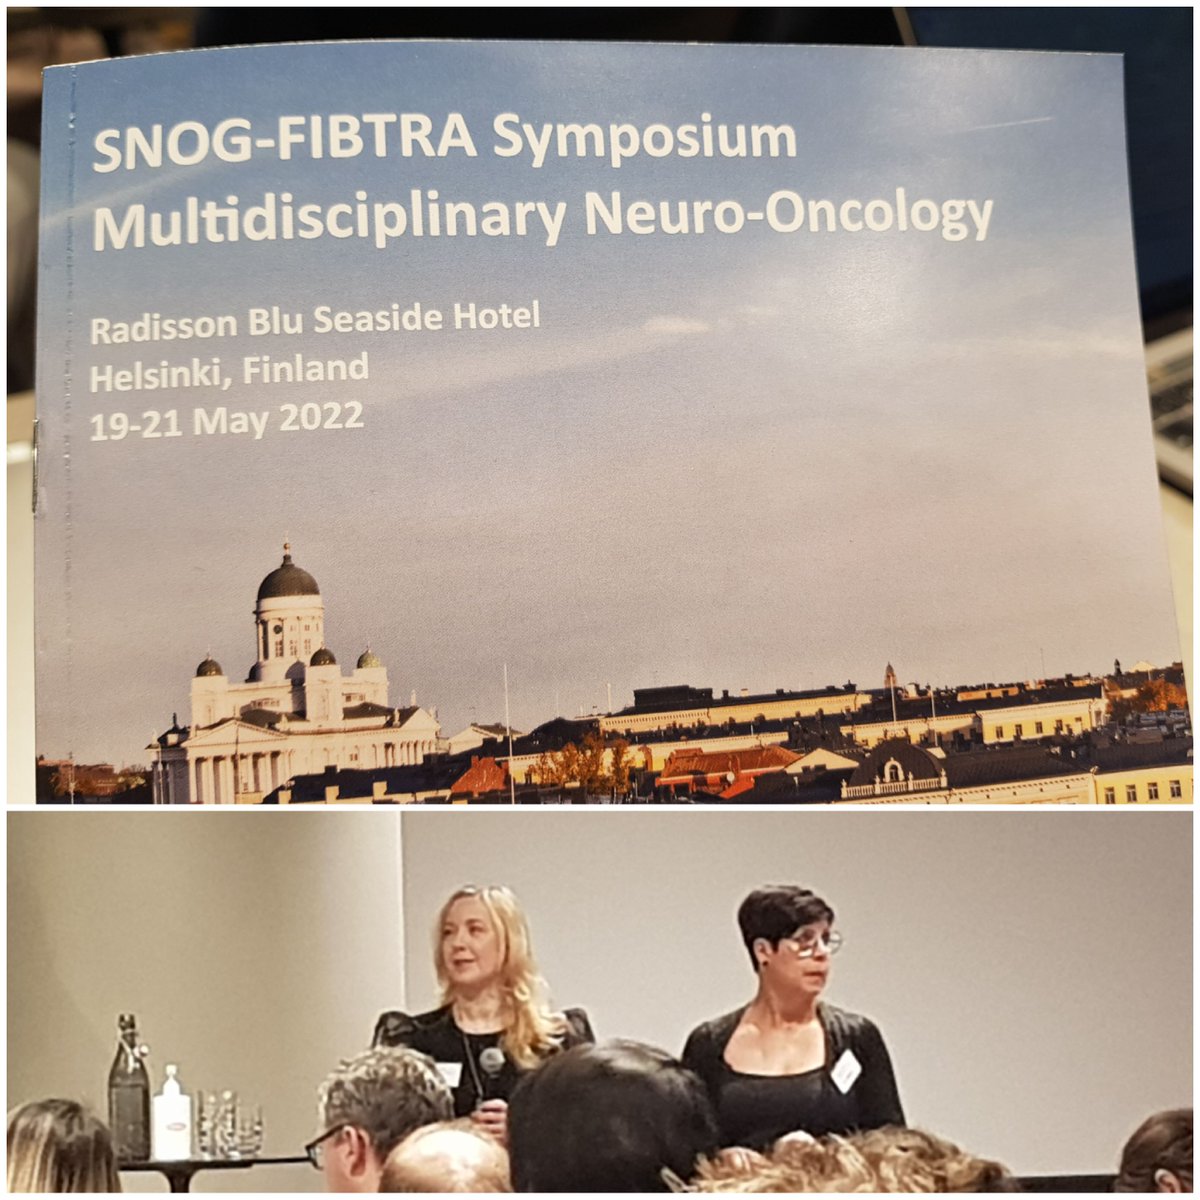 Long anticipated #snogfibtra2022  symposium ongoing in Helsinki. Three days of presentations on exciting top level neuro-oncology research. @Granberg_Lab @TampereUni https://t.co/kf1S8yNQKq